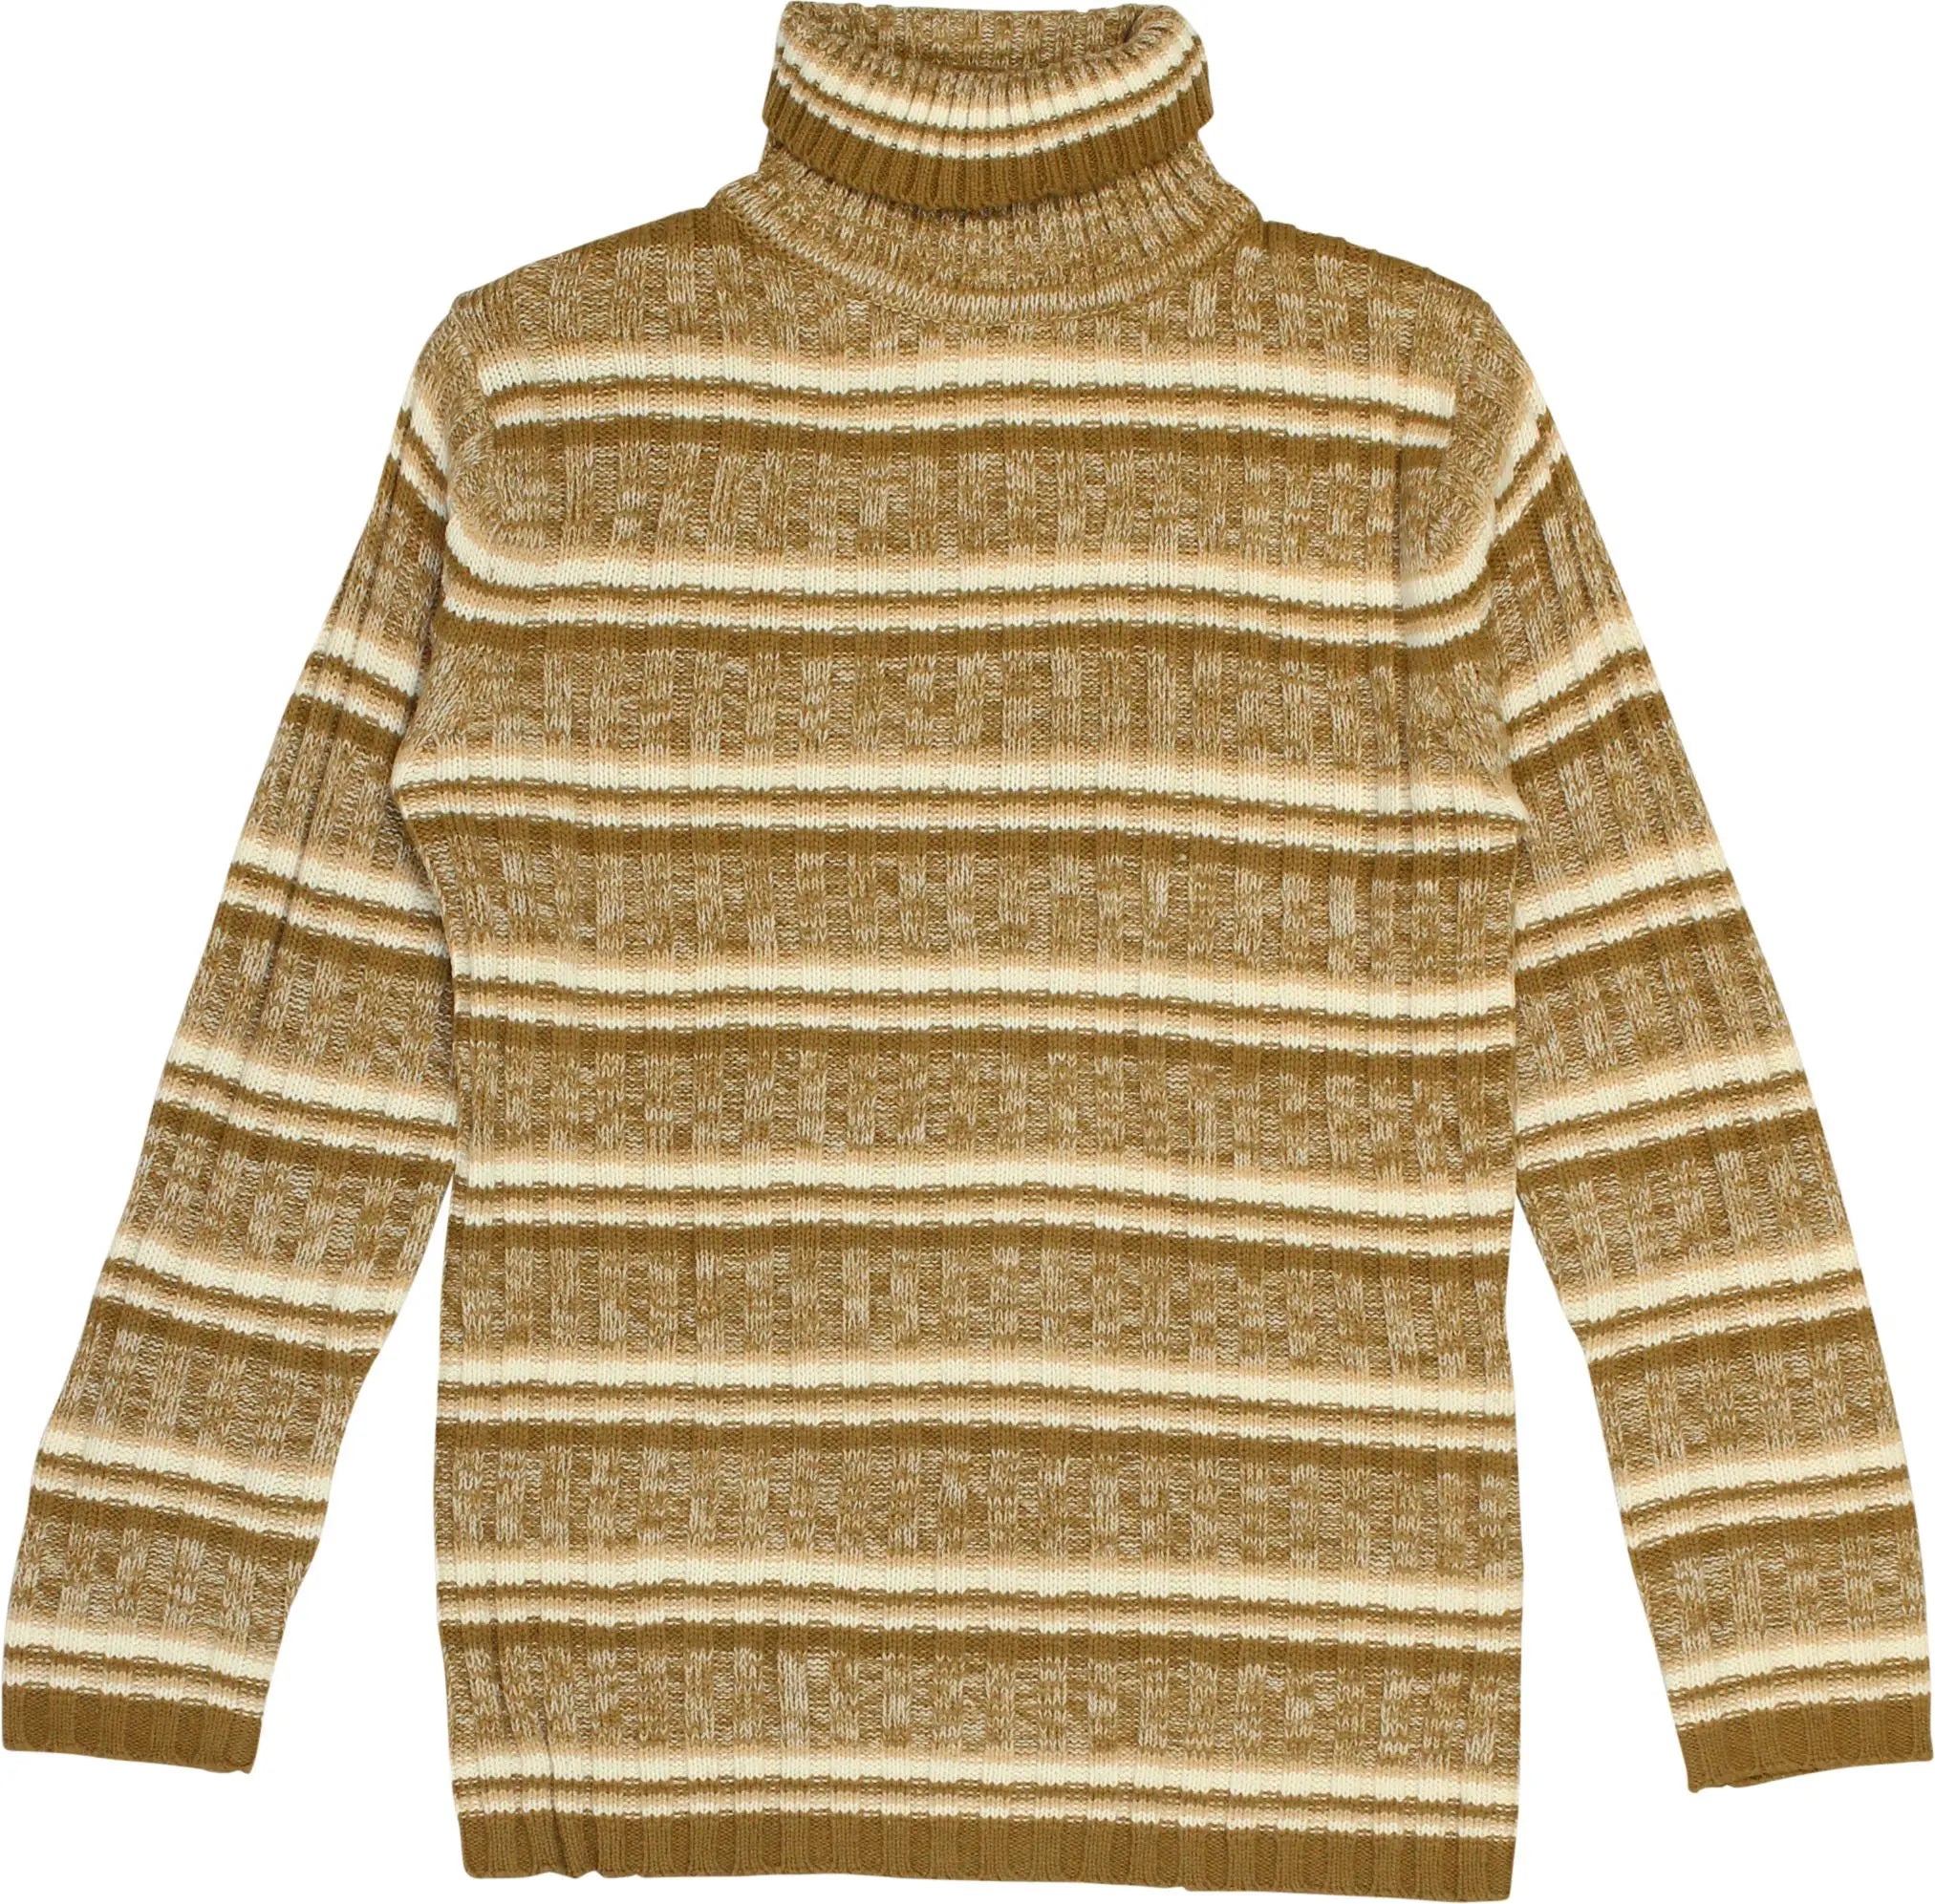 Unknown - Turtleneck Jumper- ThriftTale.com - Vintage and second handclothing